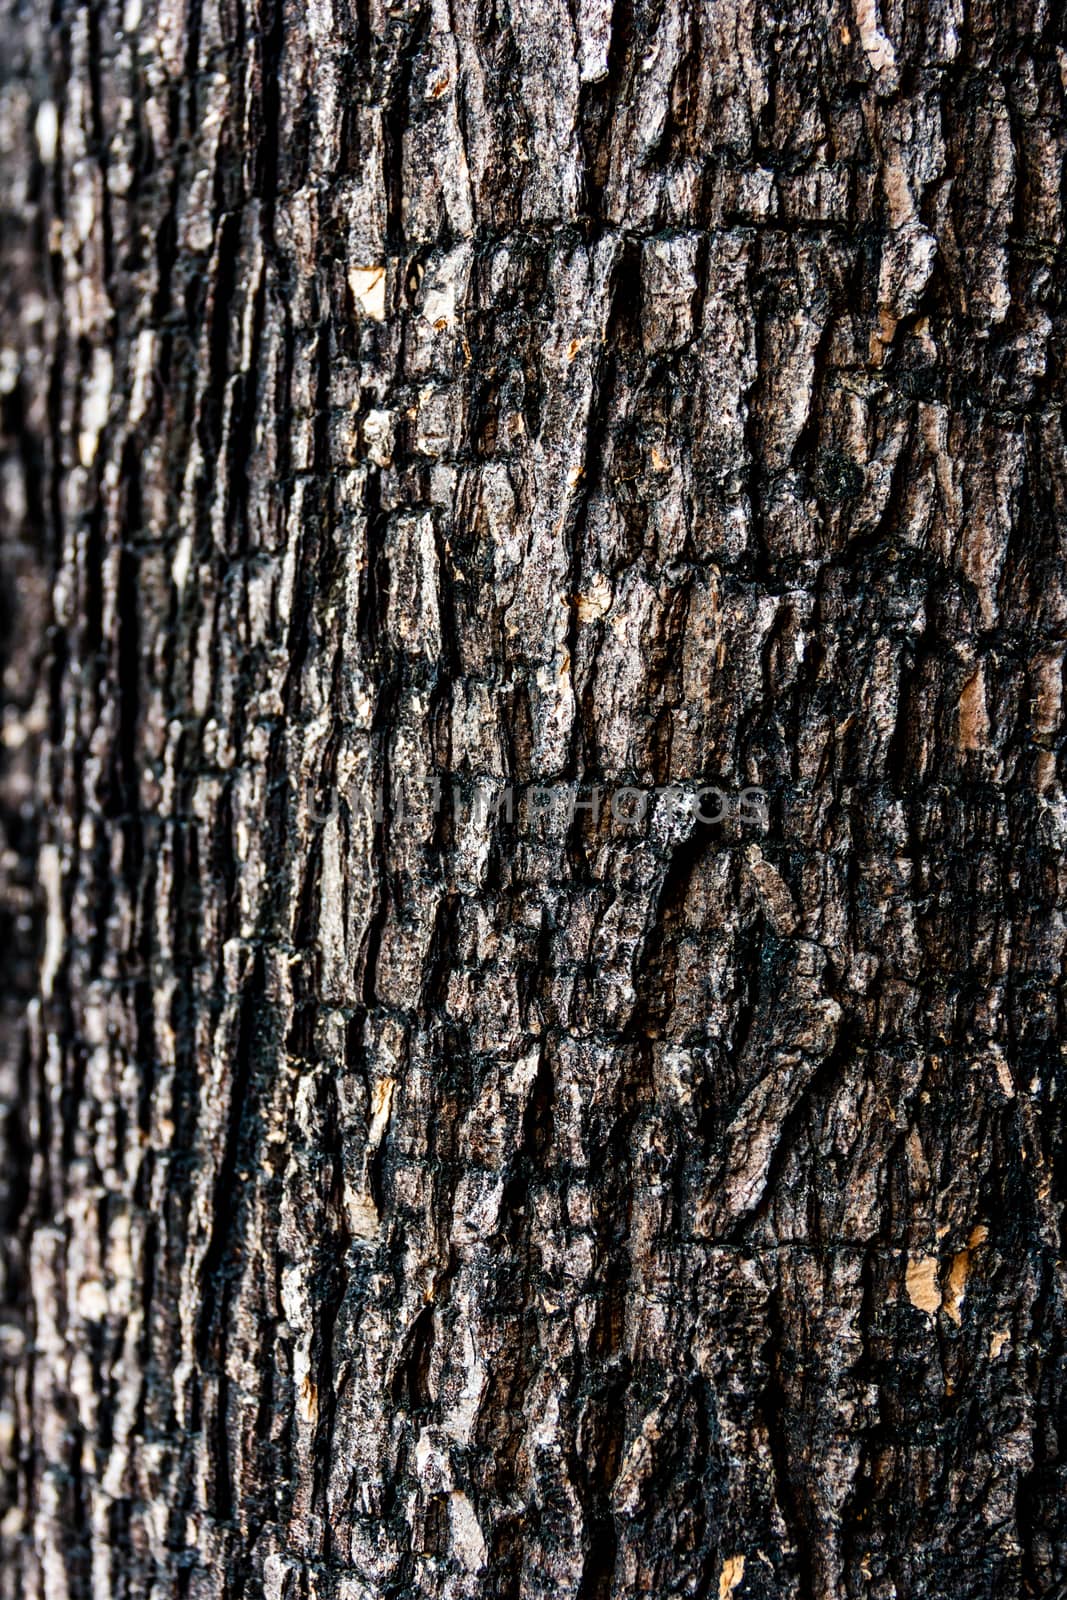 Bark of tree.Choose a focal point in the center of the image. by suriyaph